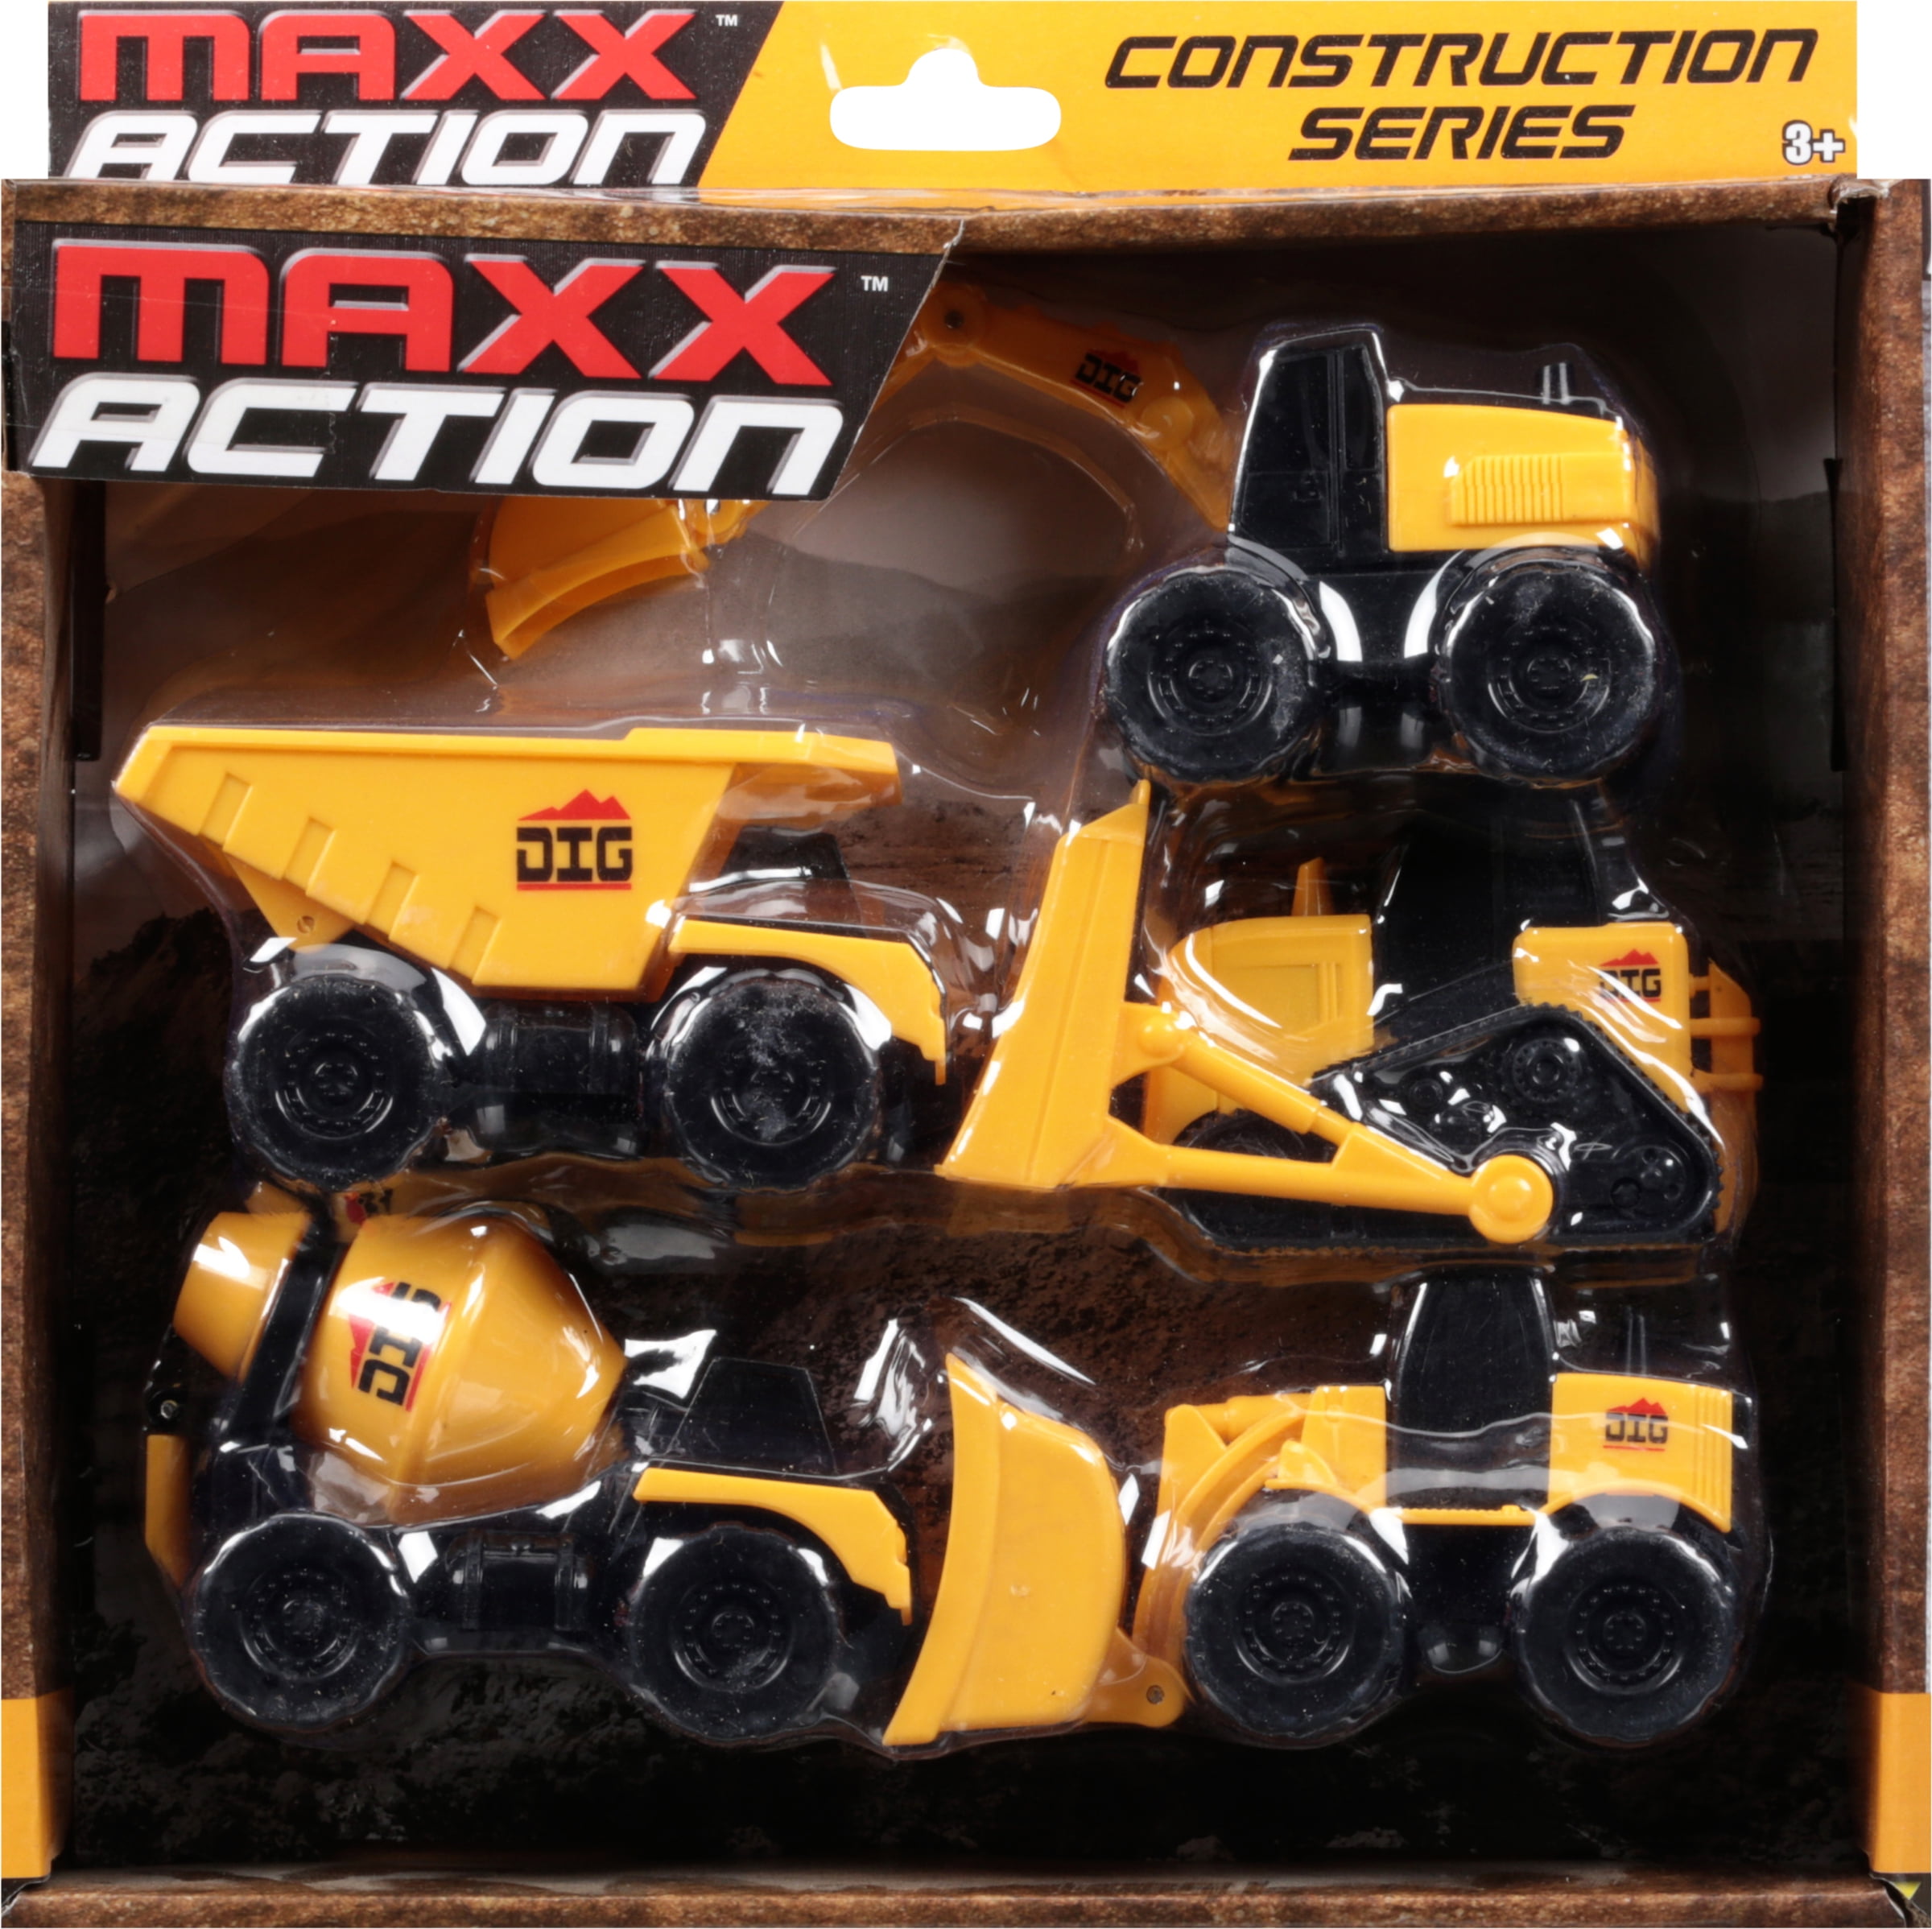 Early Educational and Birthday Party Gift for Boys 3,4,5,6,7,8,9 Year Olds Excavator Dump Truck Cement Mixer Tank Truck Toy Construction Vehicle Micro Set of 4 Mini Toy Cars and Trucks for Kids